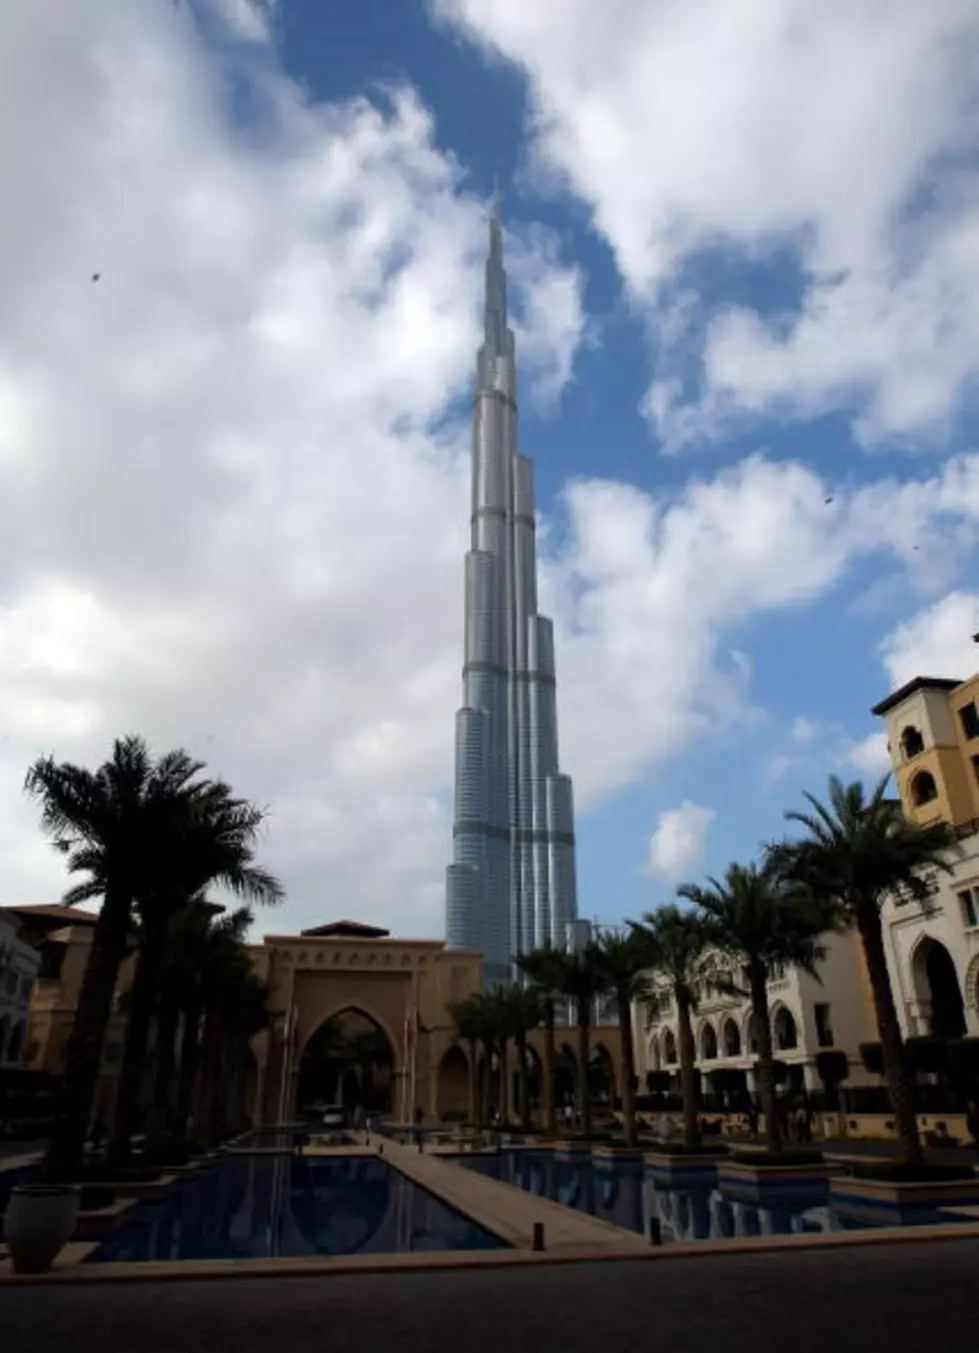 The Worlds Tallest Buildings Plumbing Is Very Sketchy[AUDIO]